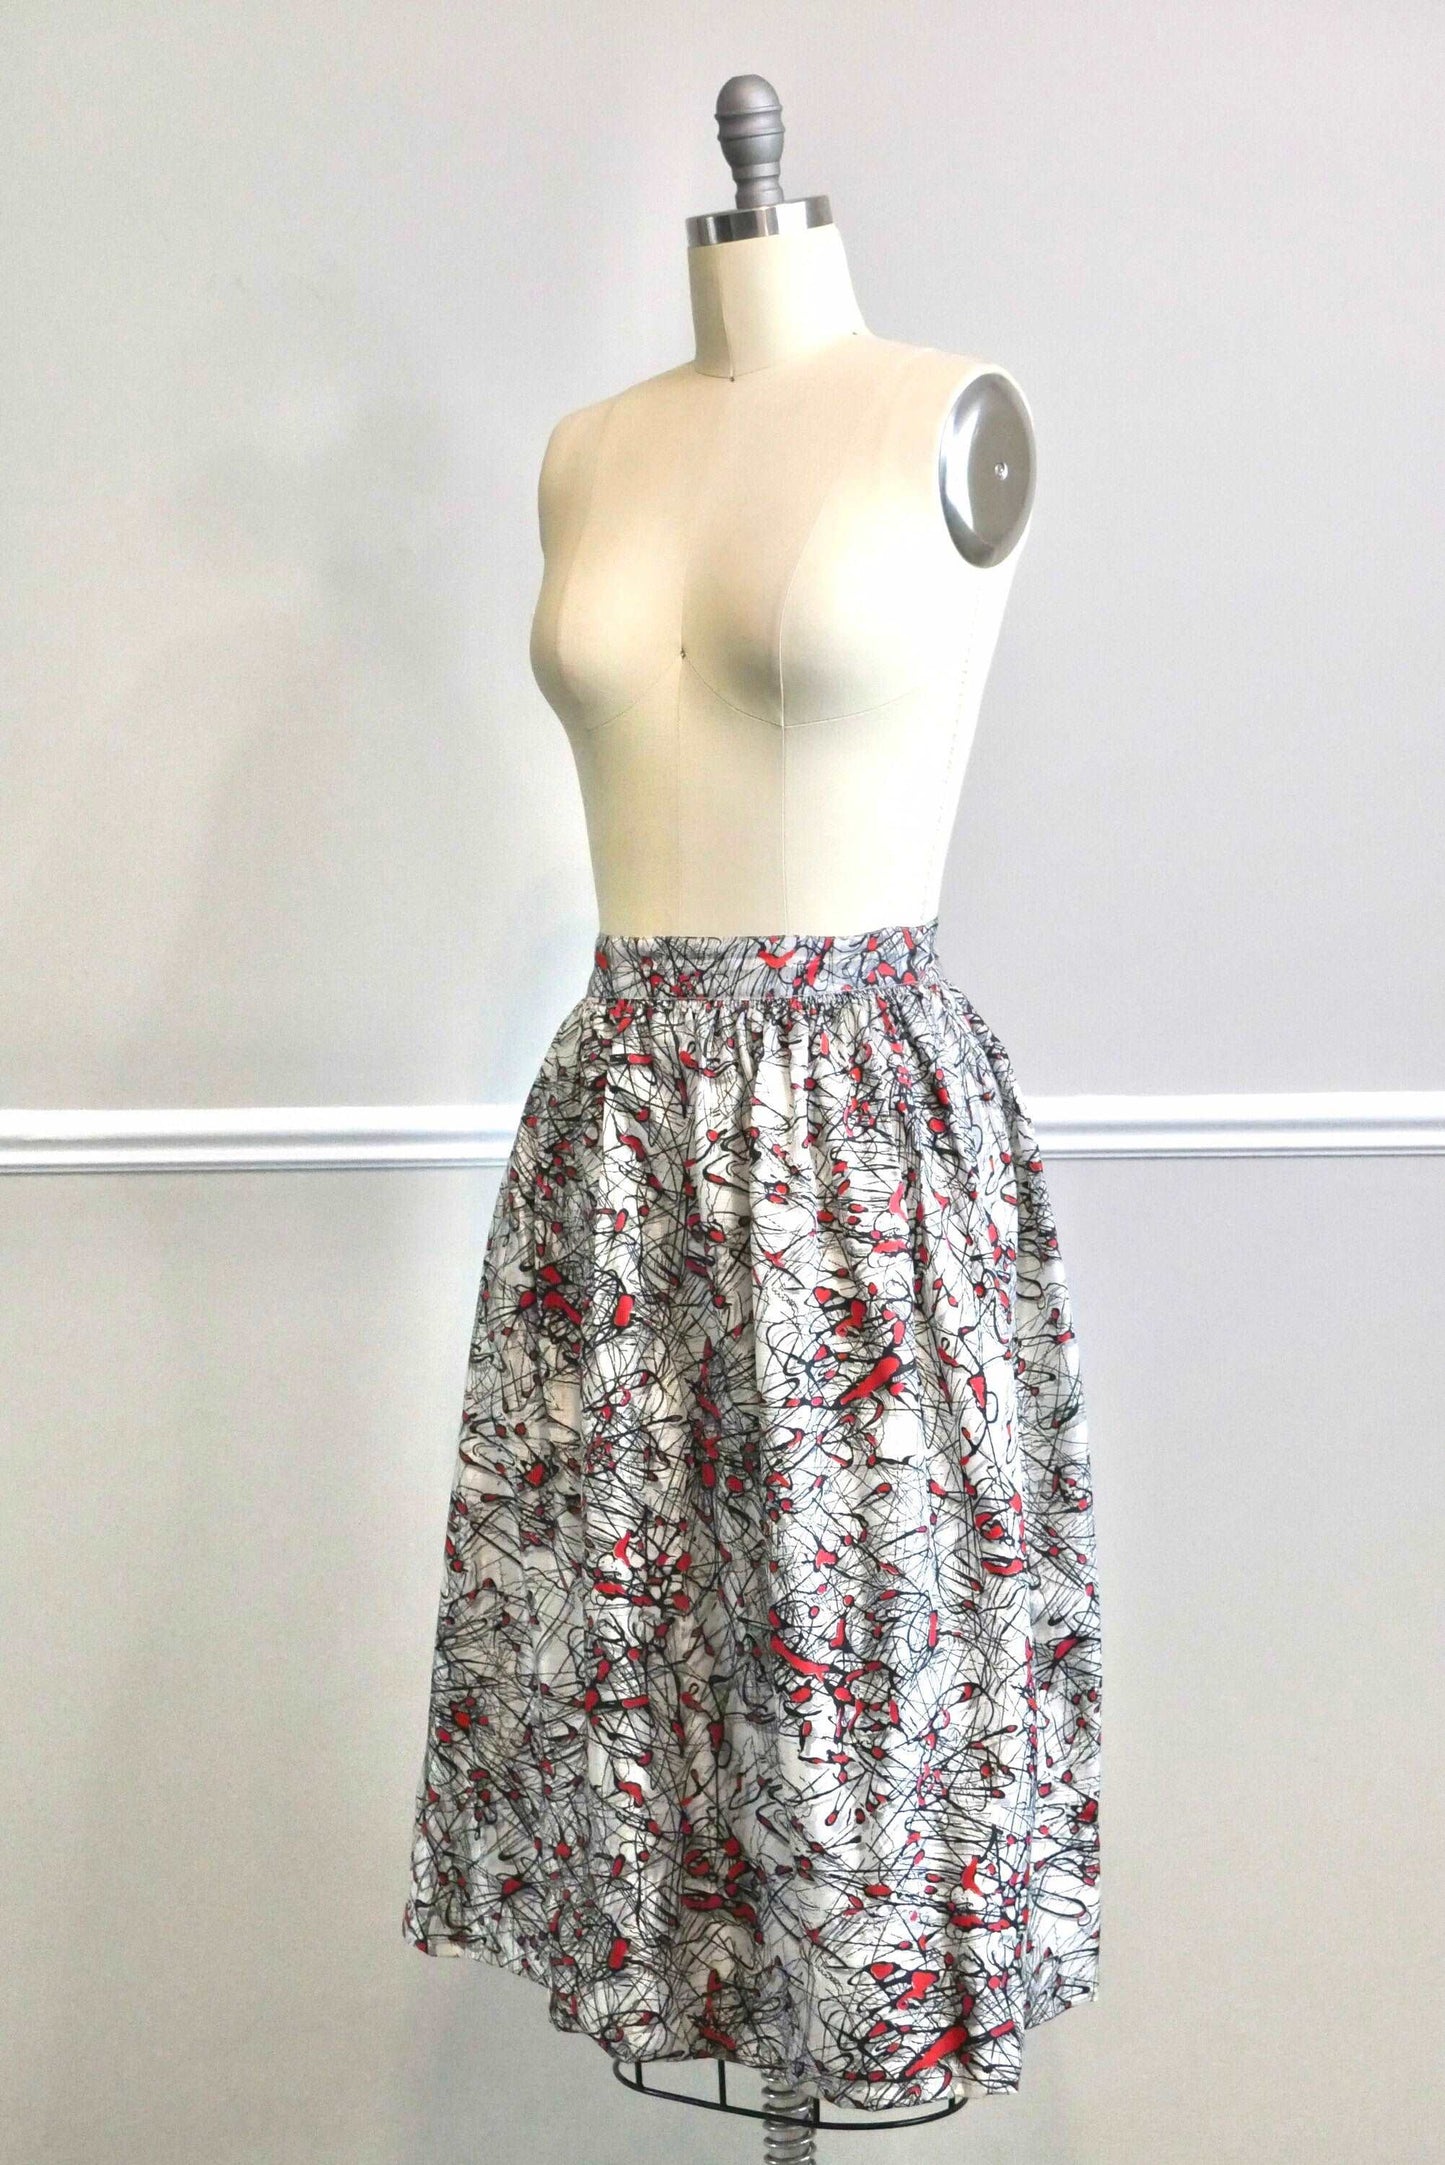 ON SALE Vintage 1950s Circle Skirt / 50s retro Jackson Pollock print Silver full skirt holiday party size XS S